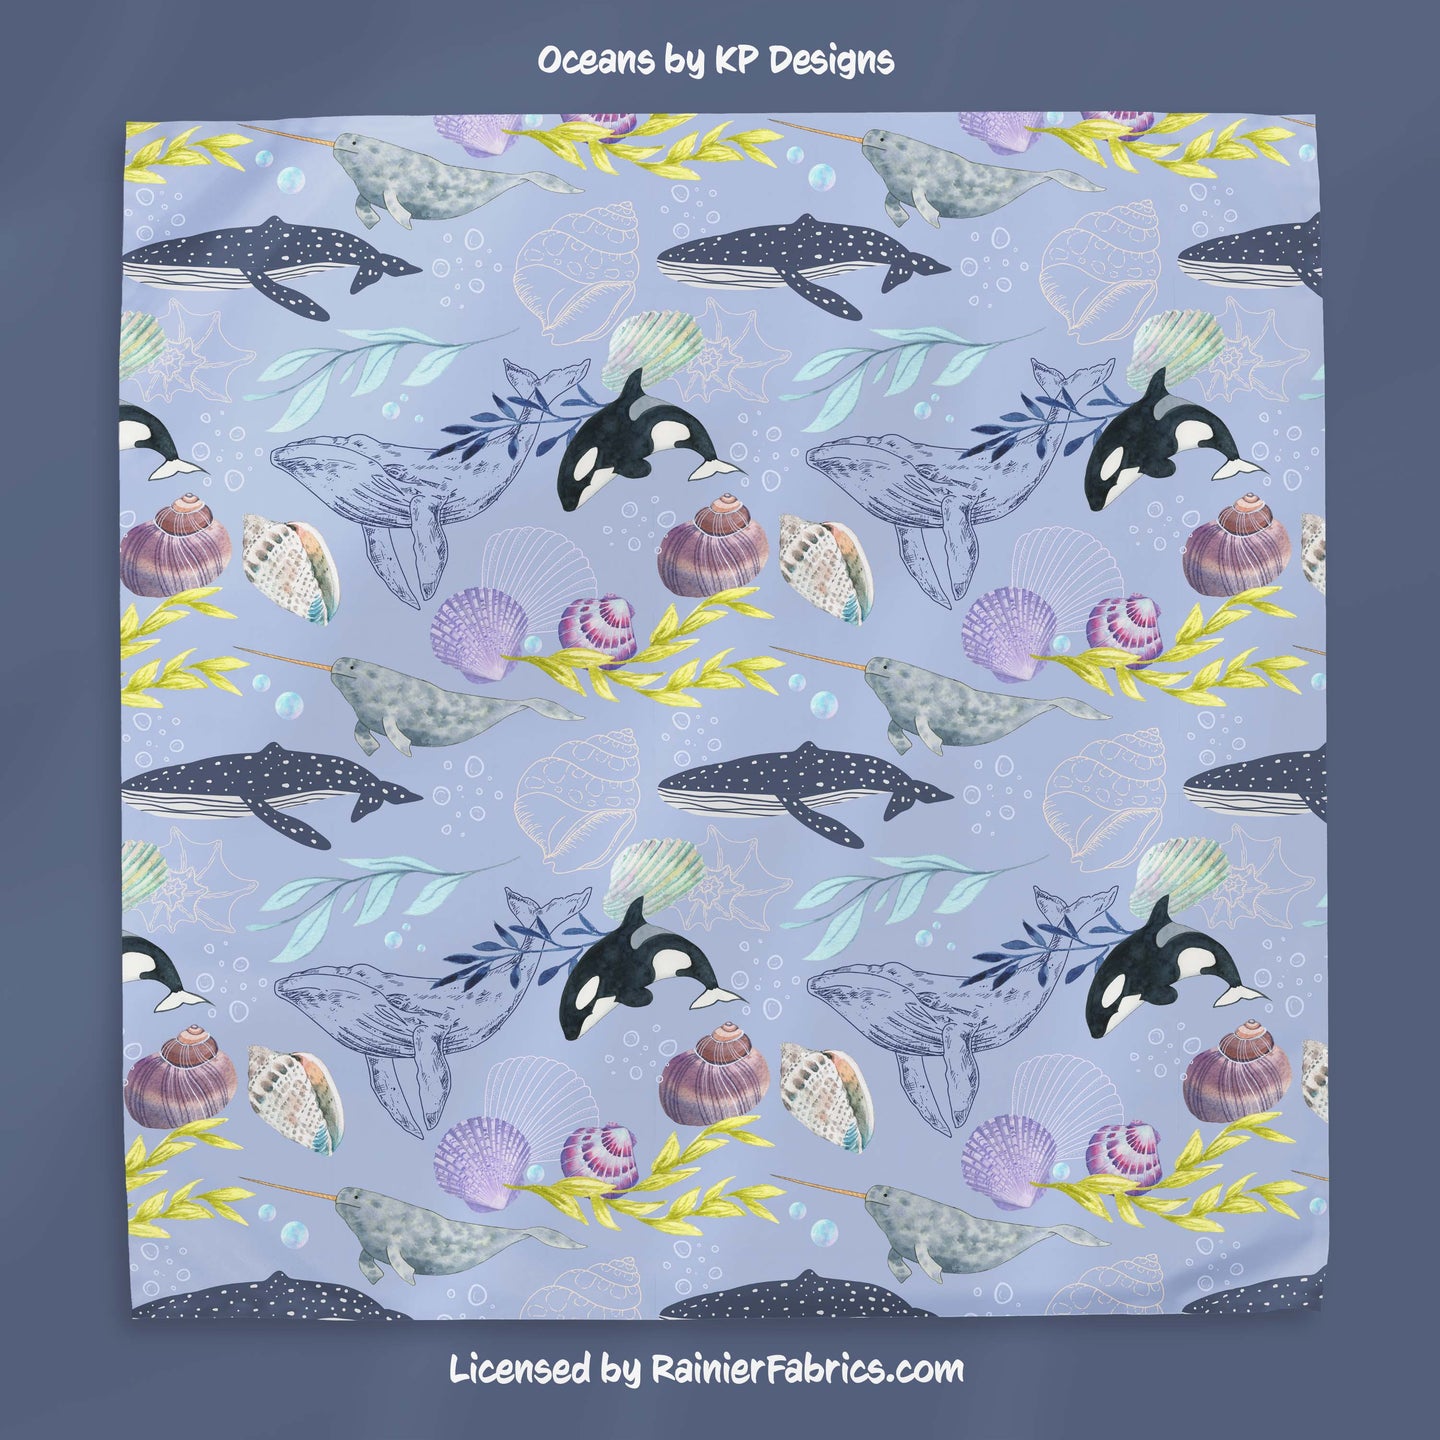 Oceans by KP Design - 2-5 day turnaround - Order by 1/2 yard; Description of bases below